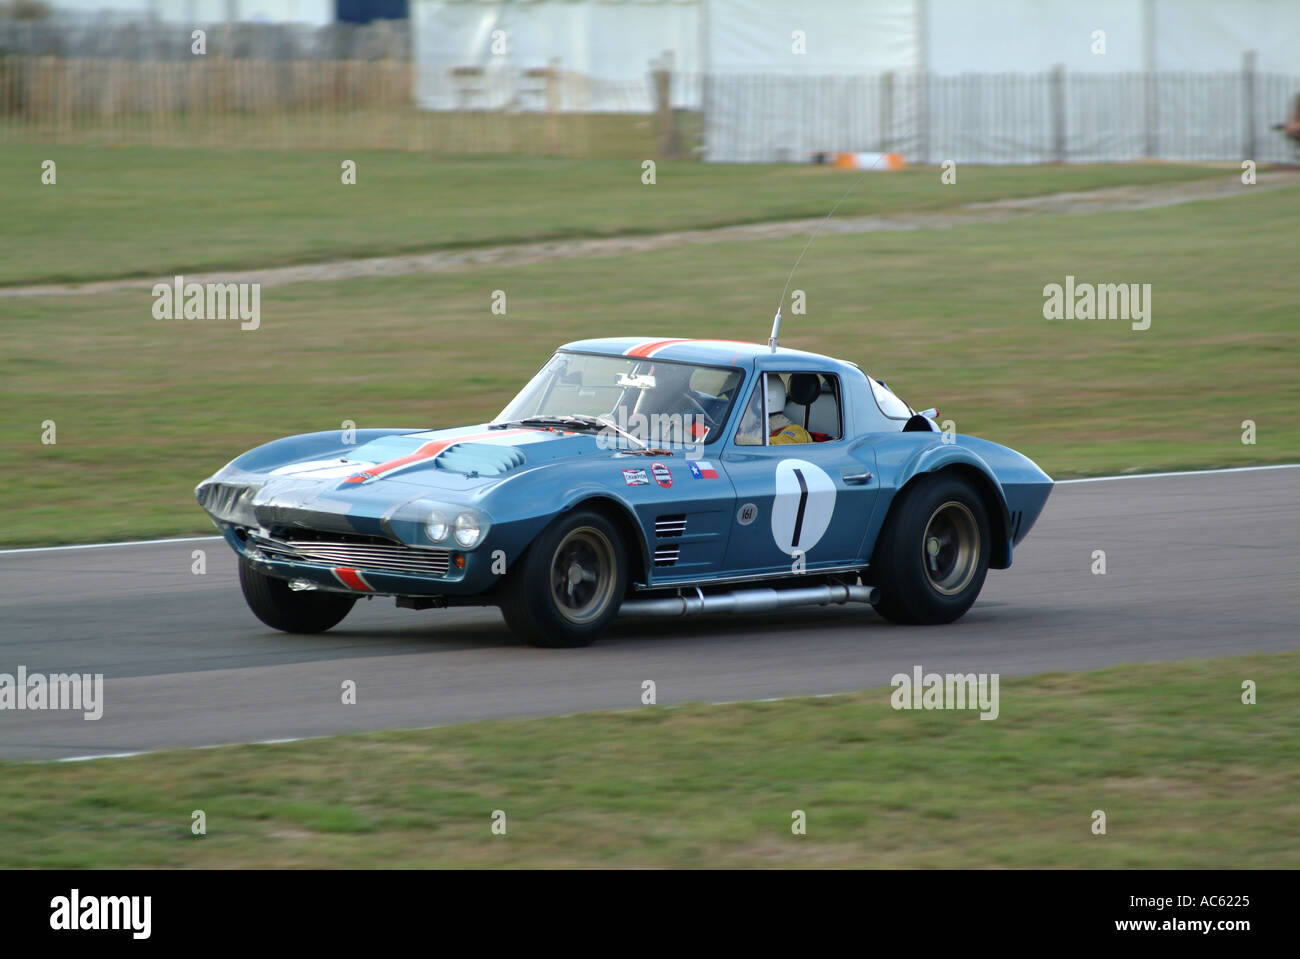 Chevrolet Corvette Grand Sport Sports Car at Goodwood Revival Motor Racing Meeting 2003 West Sussex England United Kingdom UK Stock Photo